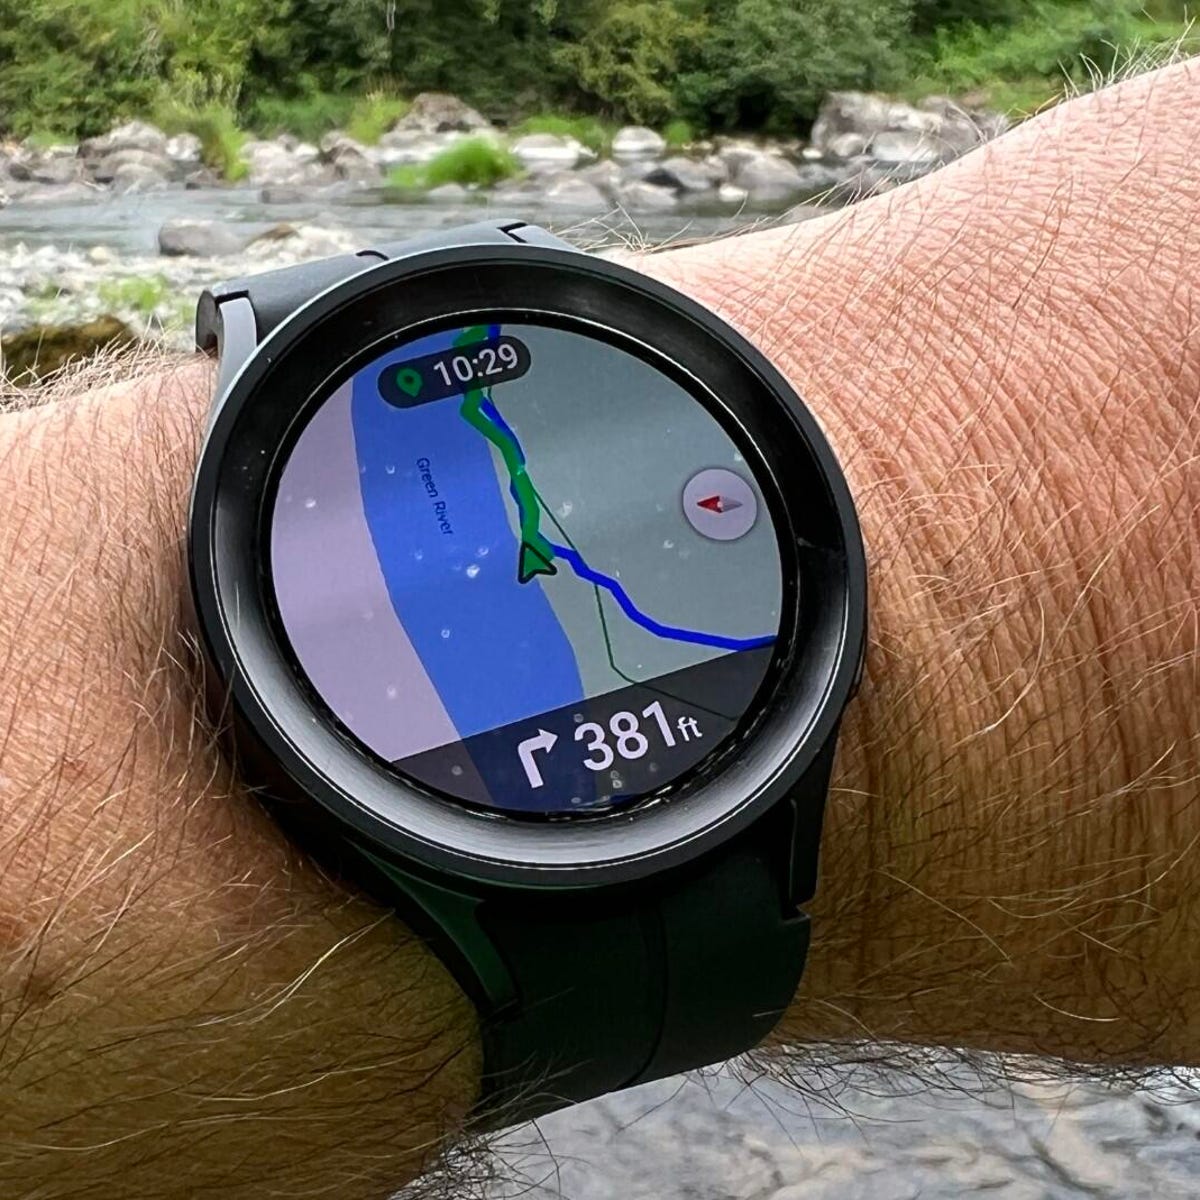 Fuera Completamente seco látigo Samsung Galaxy Watch 5 Pro review: The best wearable for Android fans |  ZDNET